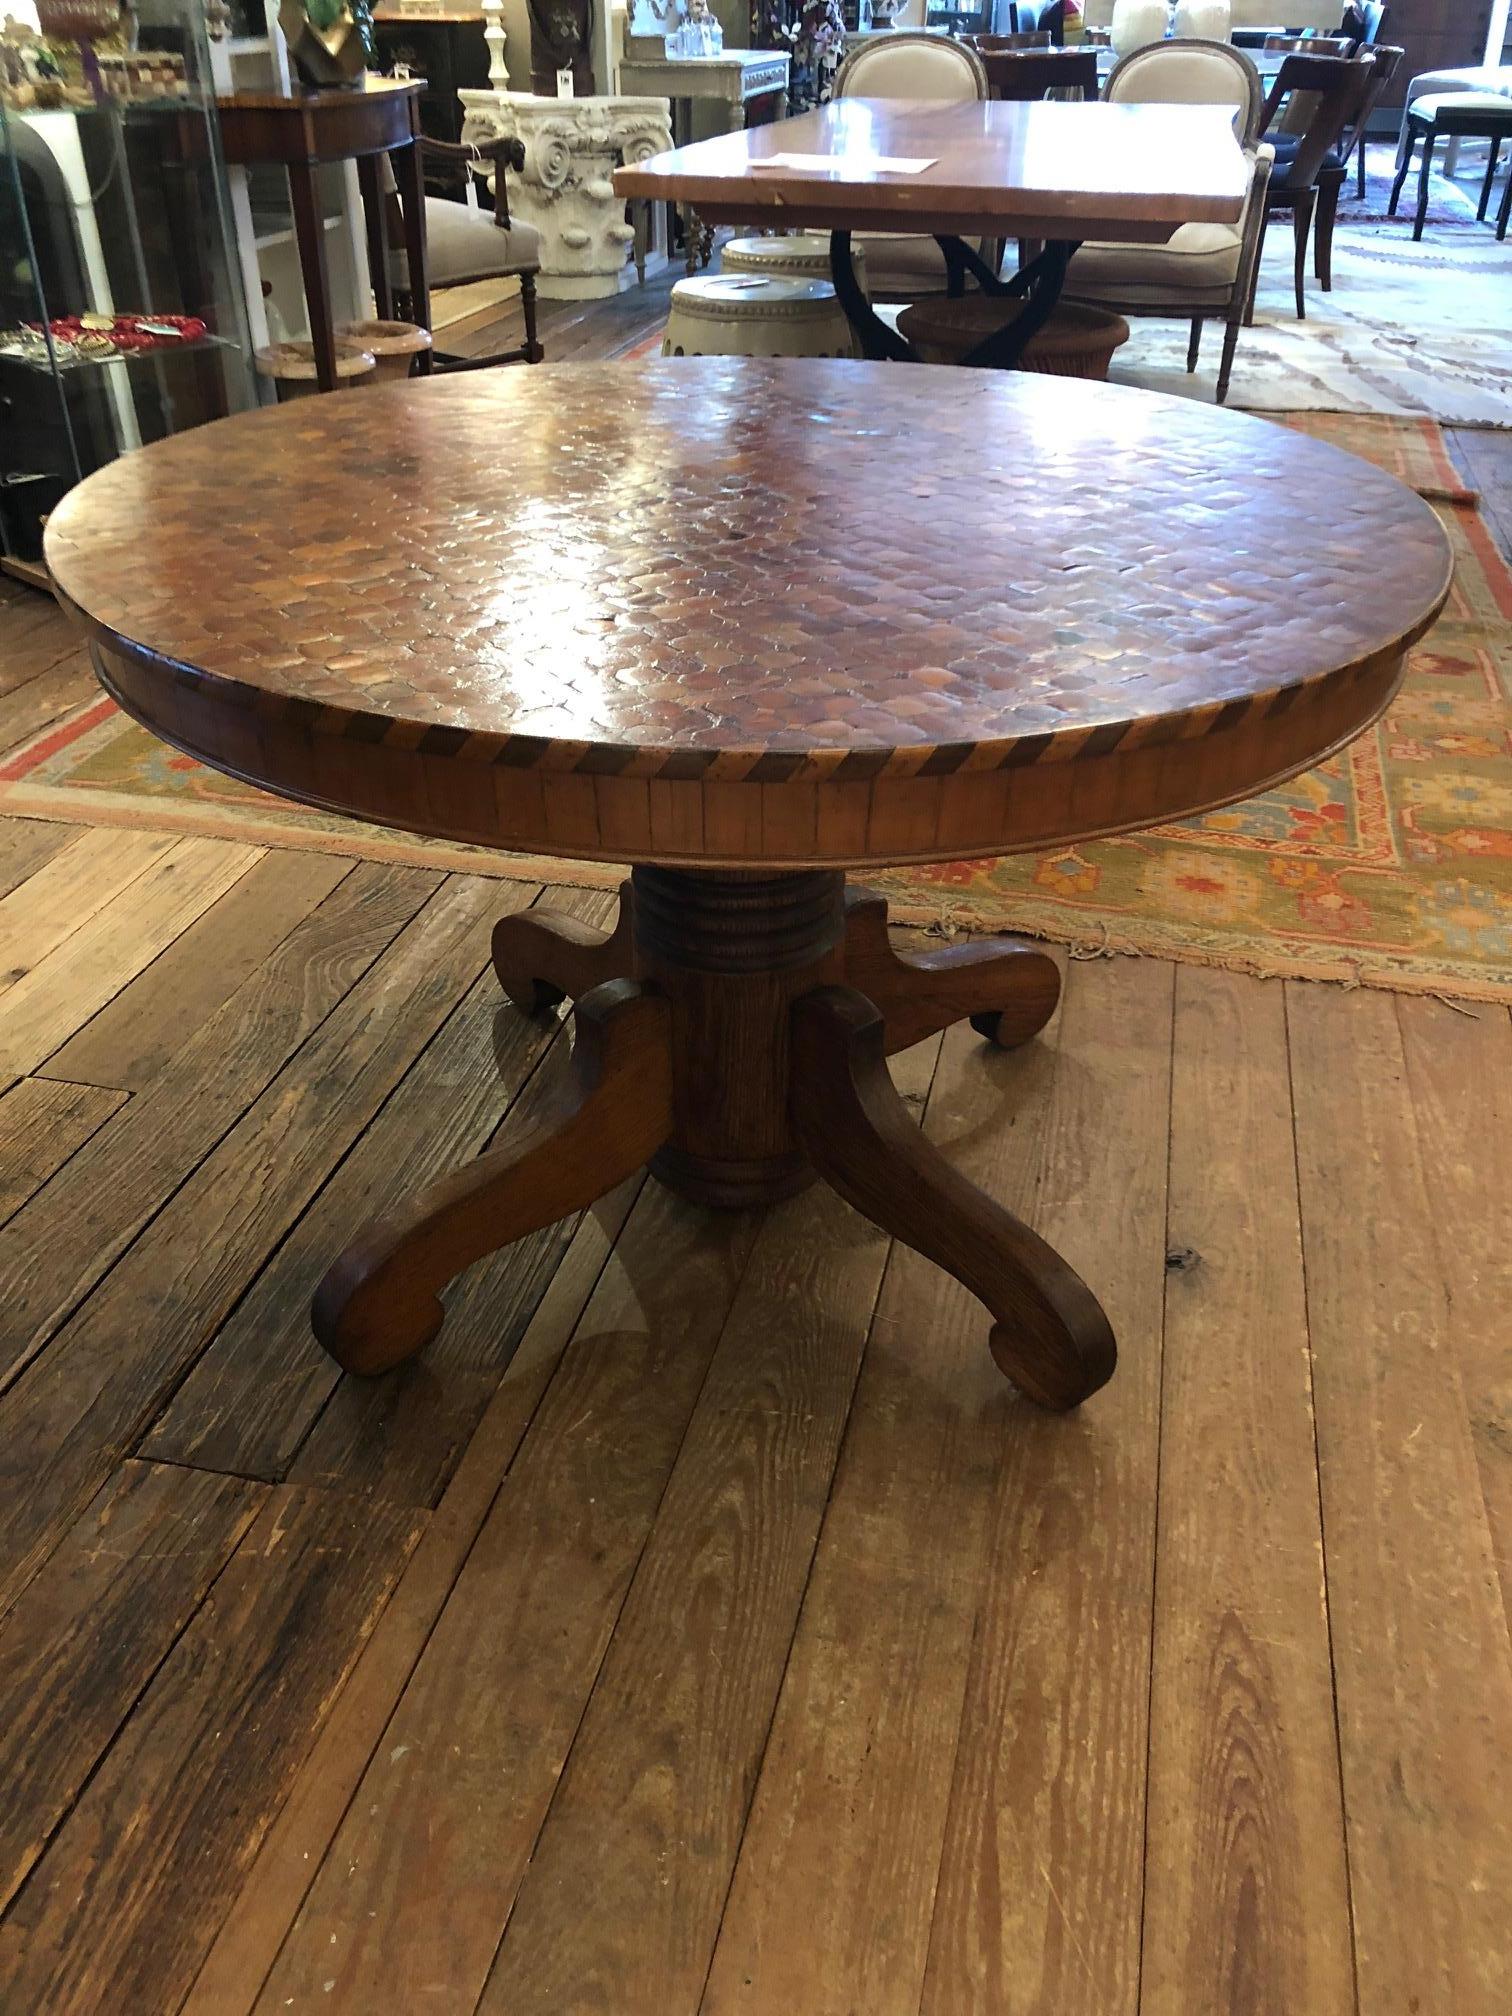 A rare find of a small round dining table or stunning center table having a one of a kind antique top, circa 1860, of inlaid round wood chips that beguiles the eye with its variety of rich hues and pattern. There is stunning parquet inlay around the